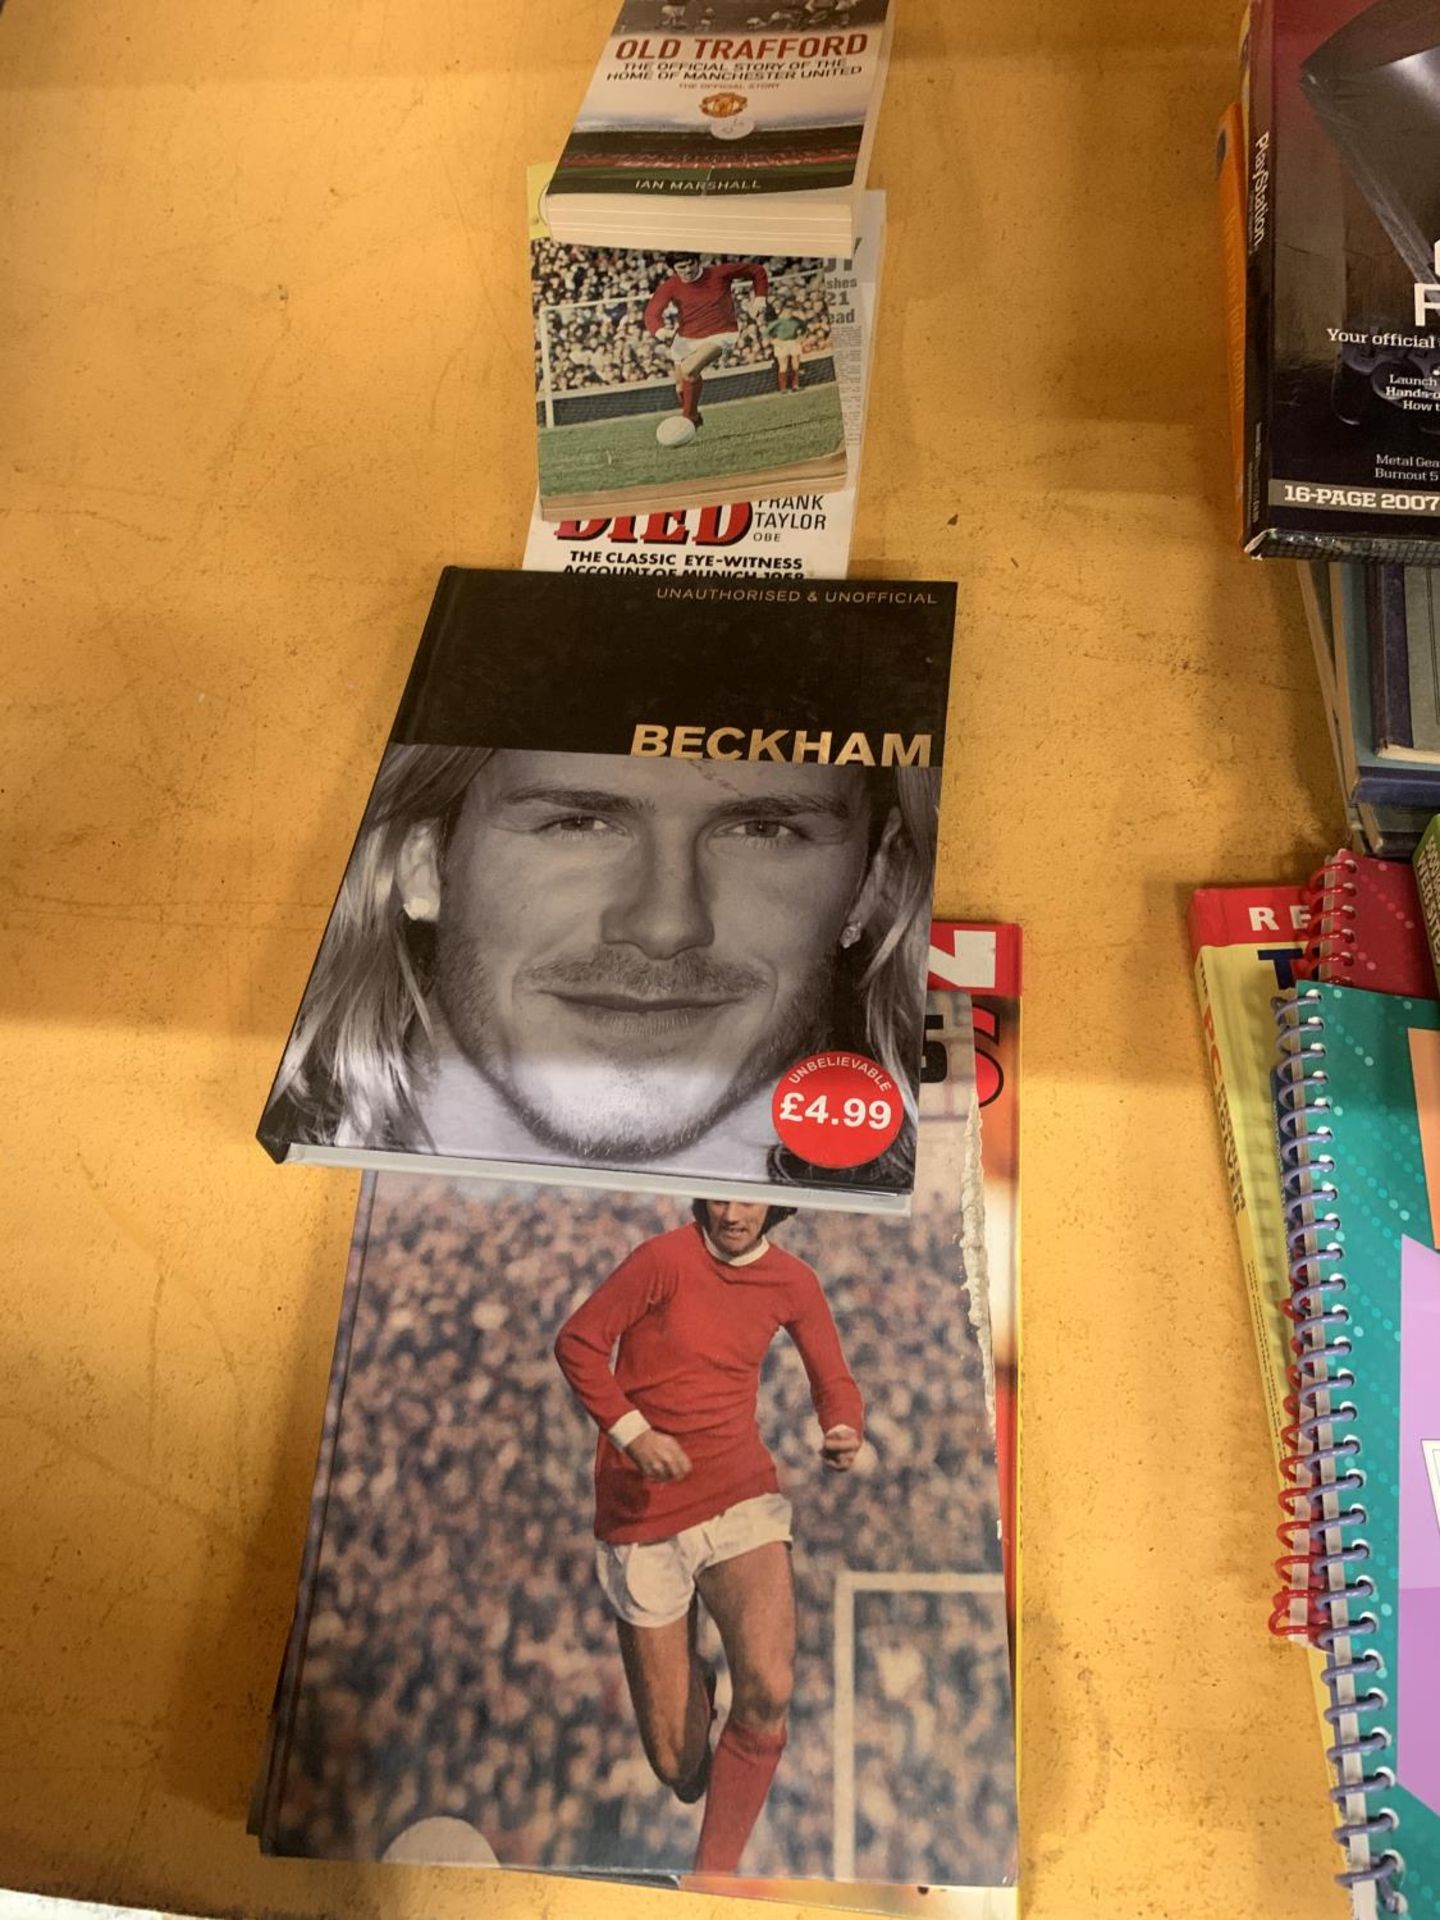 A QUANTITY OF MANCHESTER UNITED BOOKS TO INCLUDE 'THE DAY A TEAM DIED', 'BECKHAM', ETC